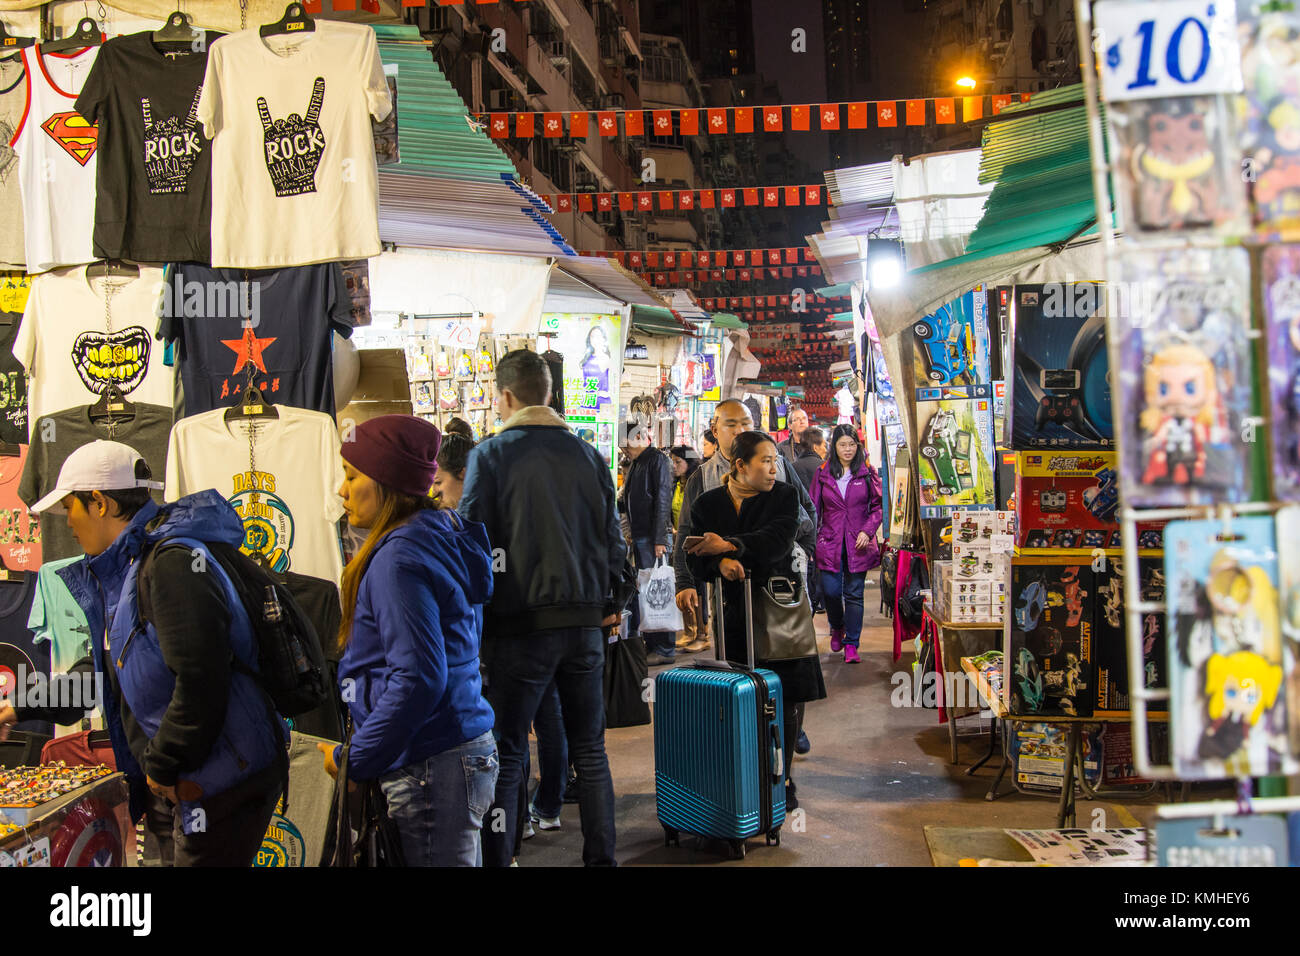 A view of the people walking in Temple street night market in Hong Kong Stock Photo